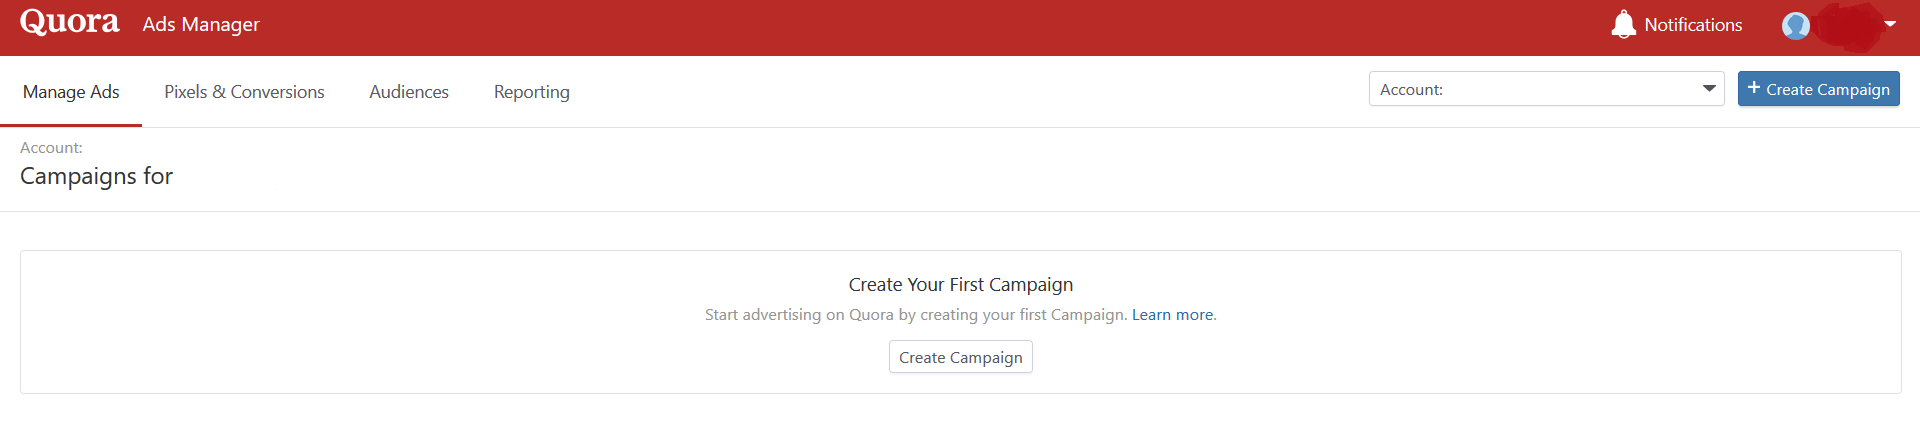 6 Proven Steps to Advertise on Quora Marketing In 2020